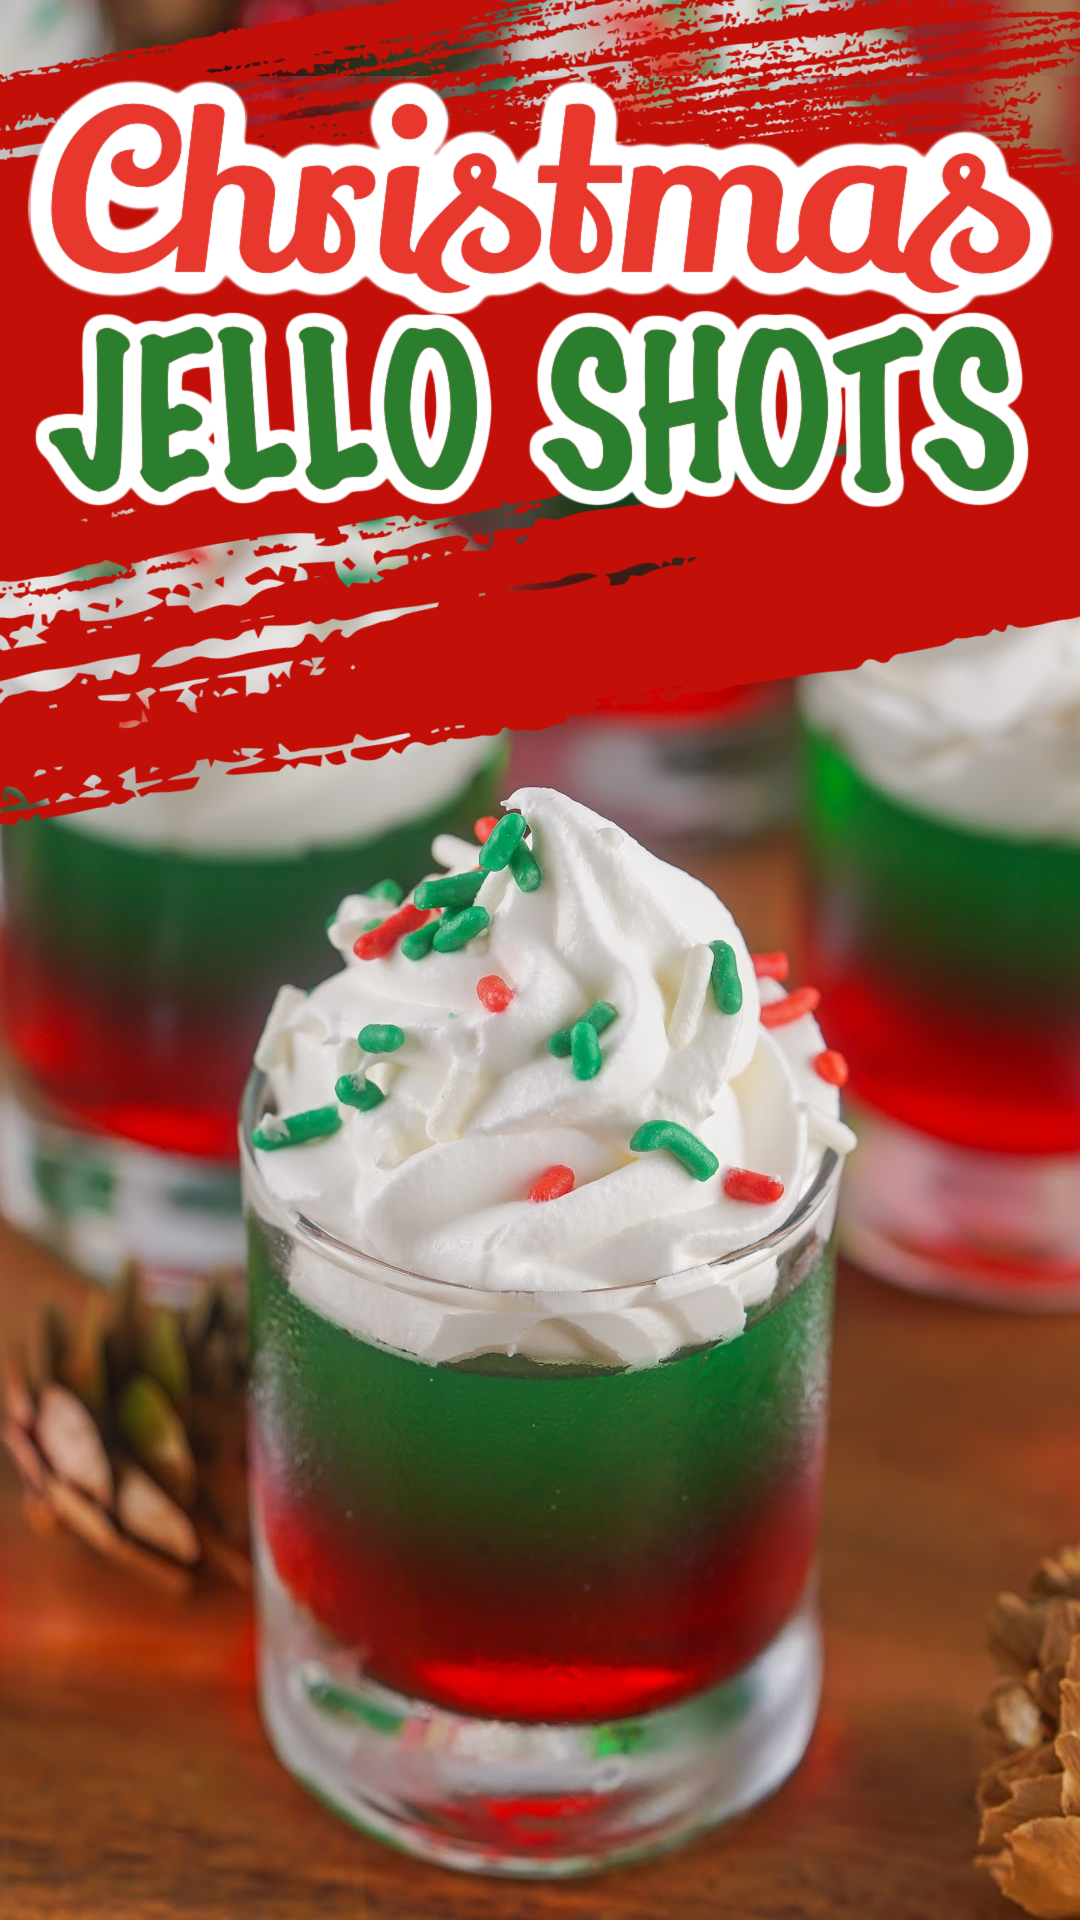 red and green layered Christmas jello shots topped with wiped cream and Christmas sprinkles.